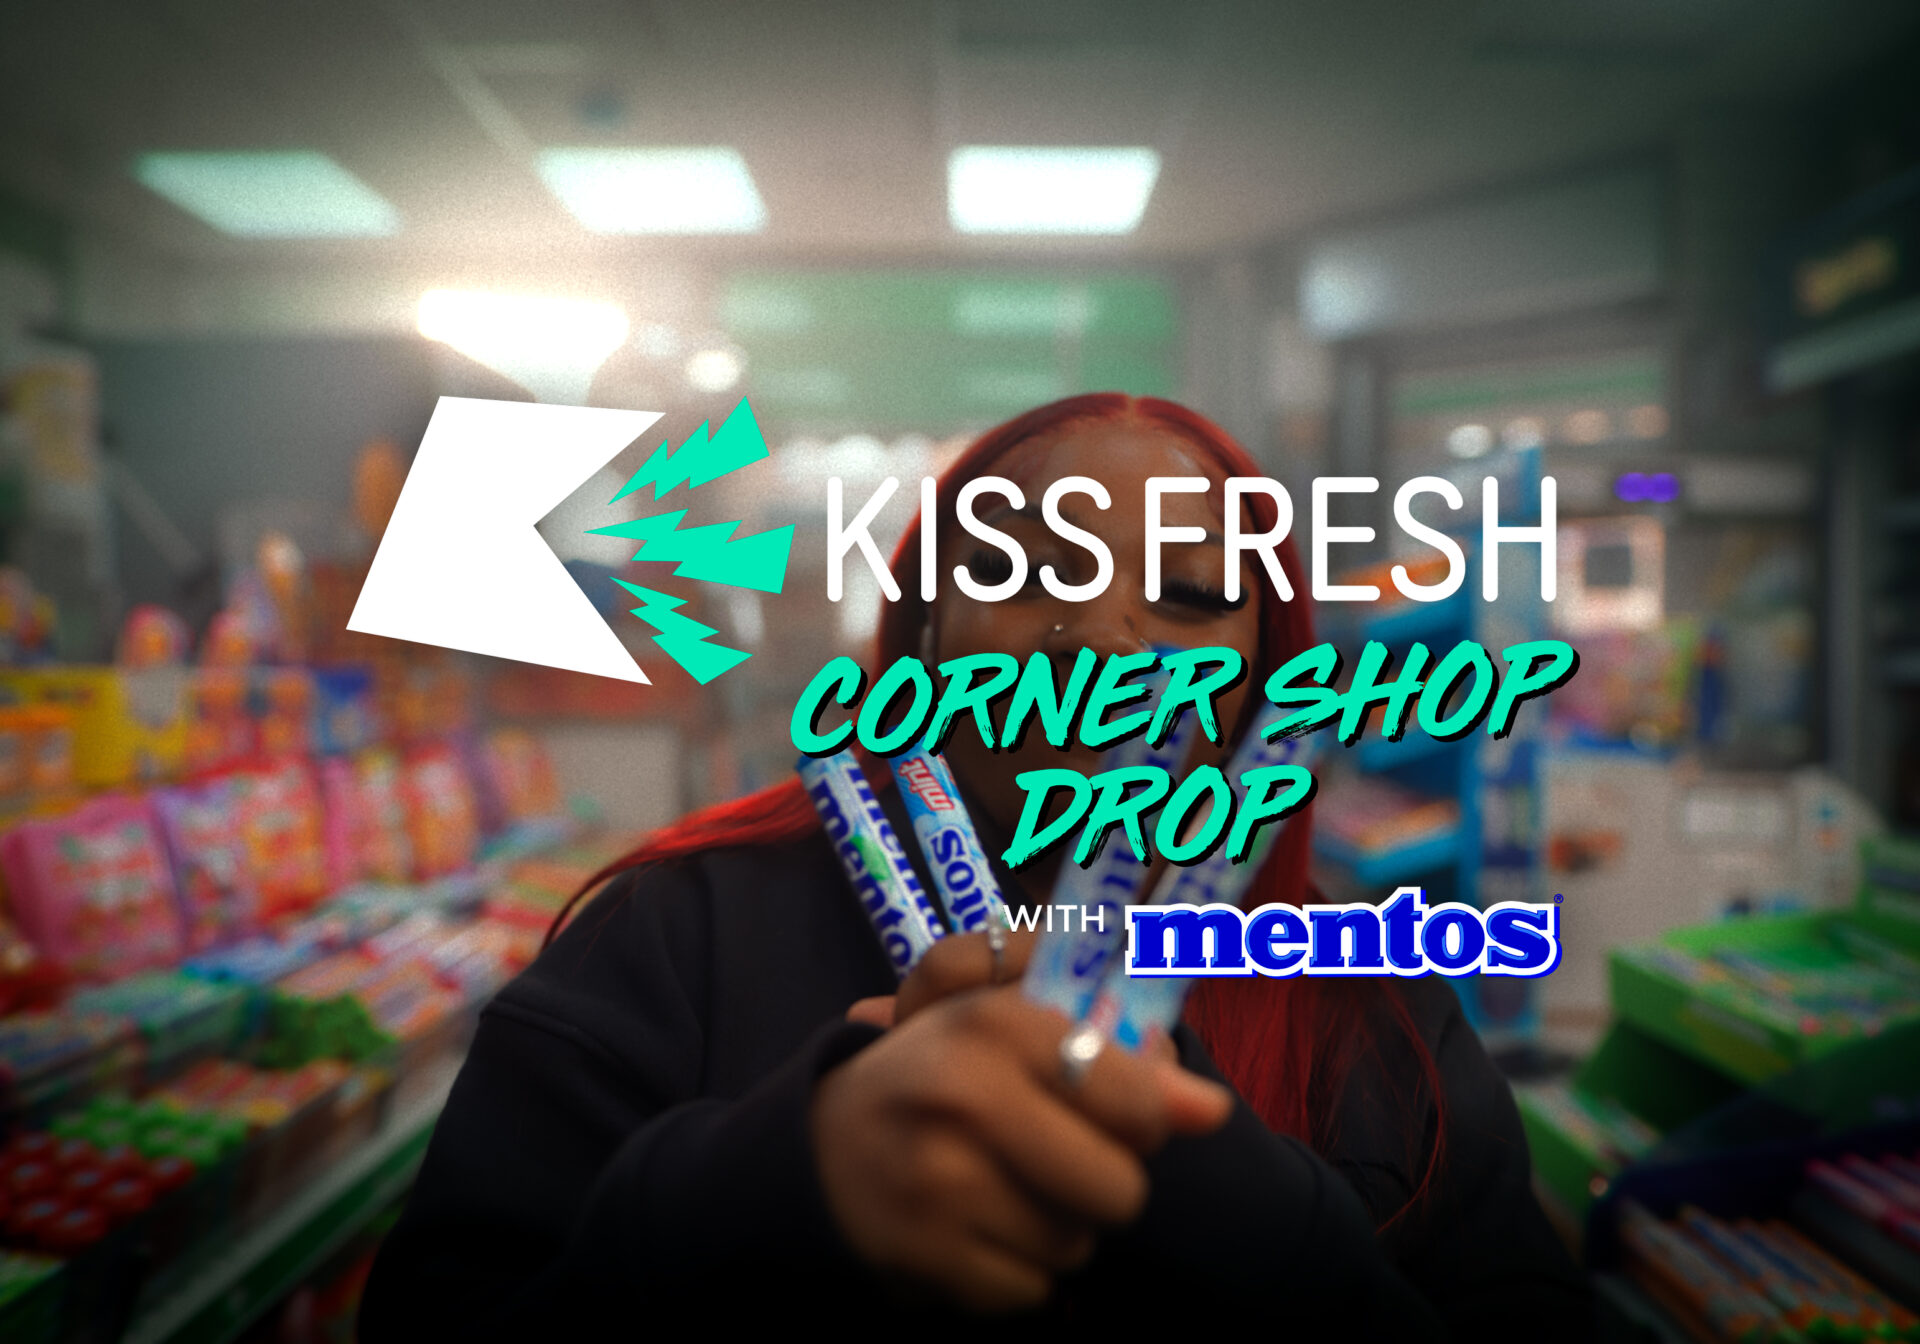 Mentos and KISS Fresh celebrate fresh talent with new Corner Shop Drop series